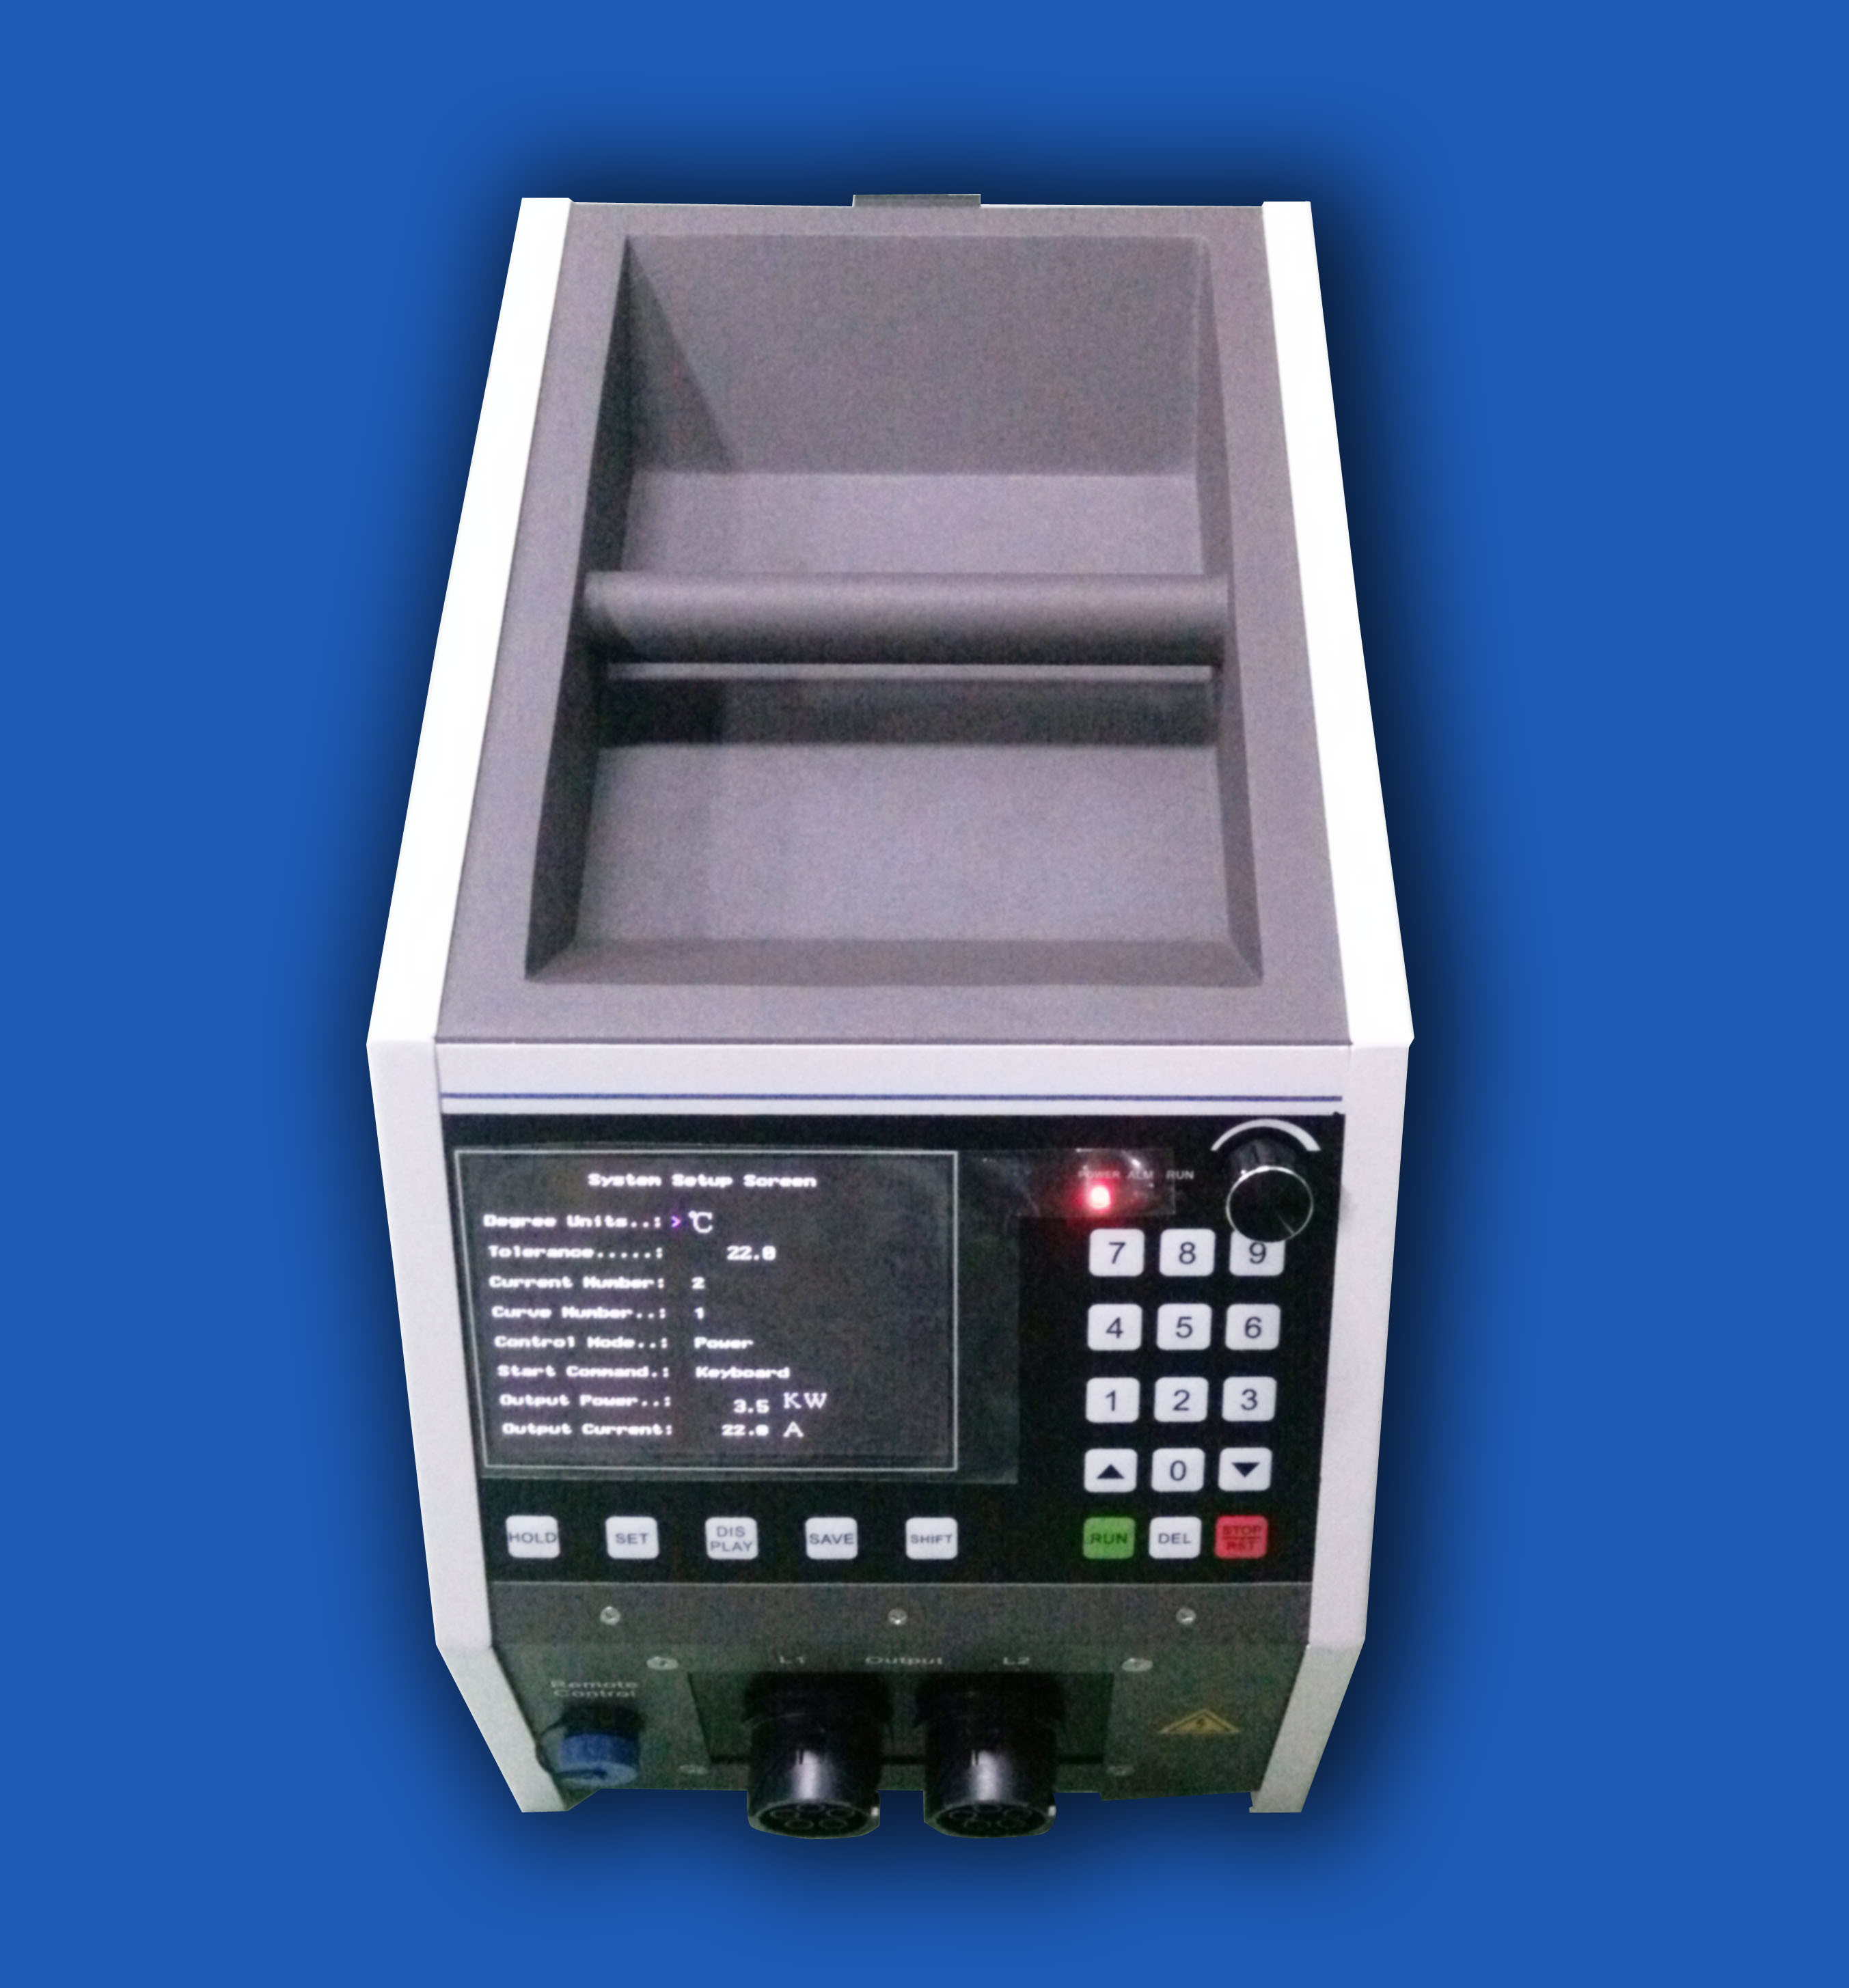 Portable Medium Frequency Induction Heating Machine For Preheating Valve Body to 400°F